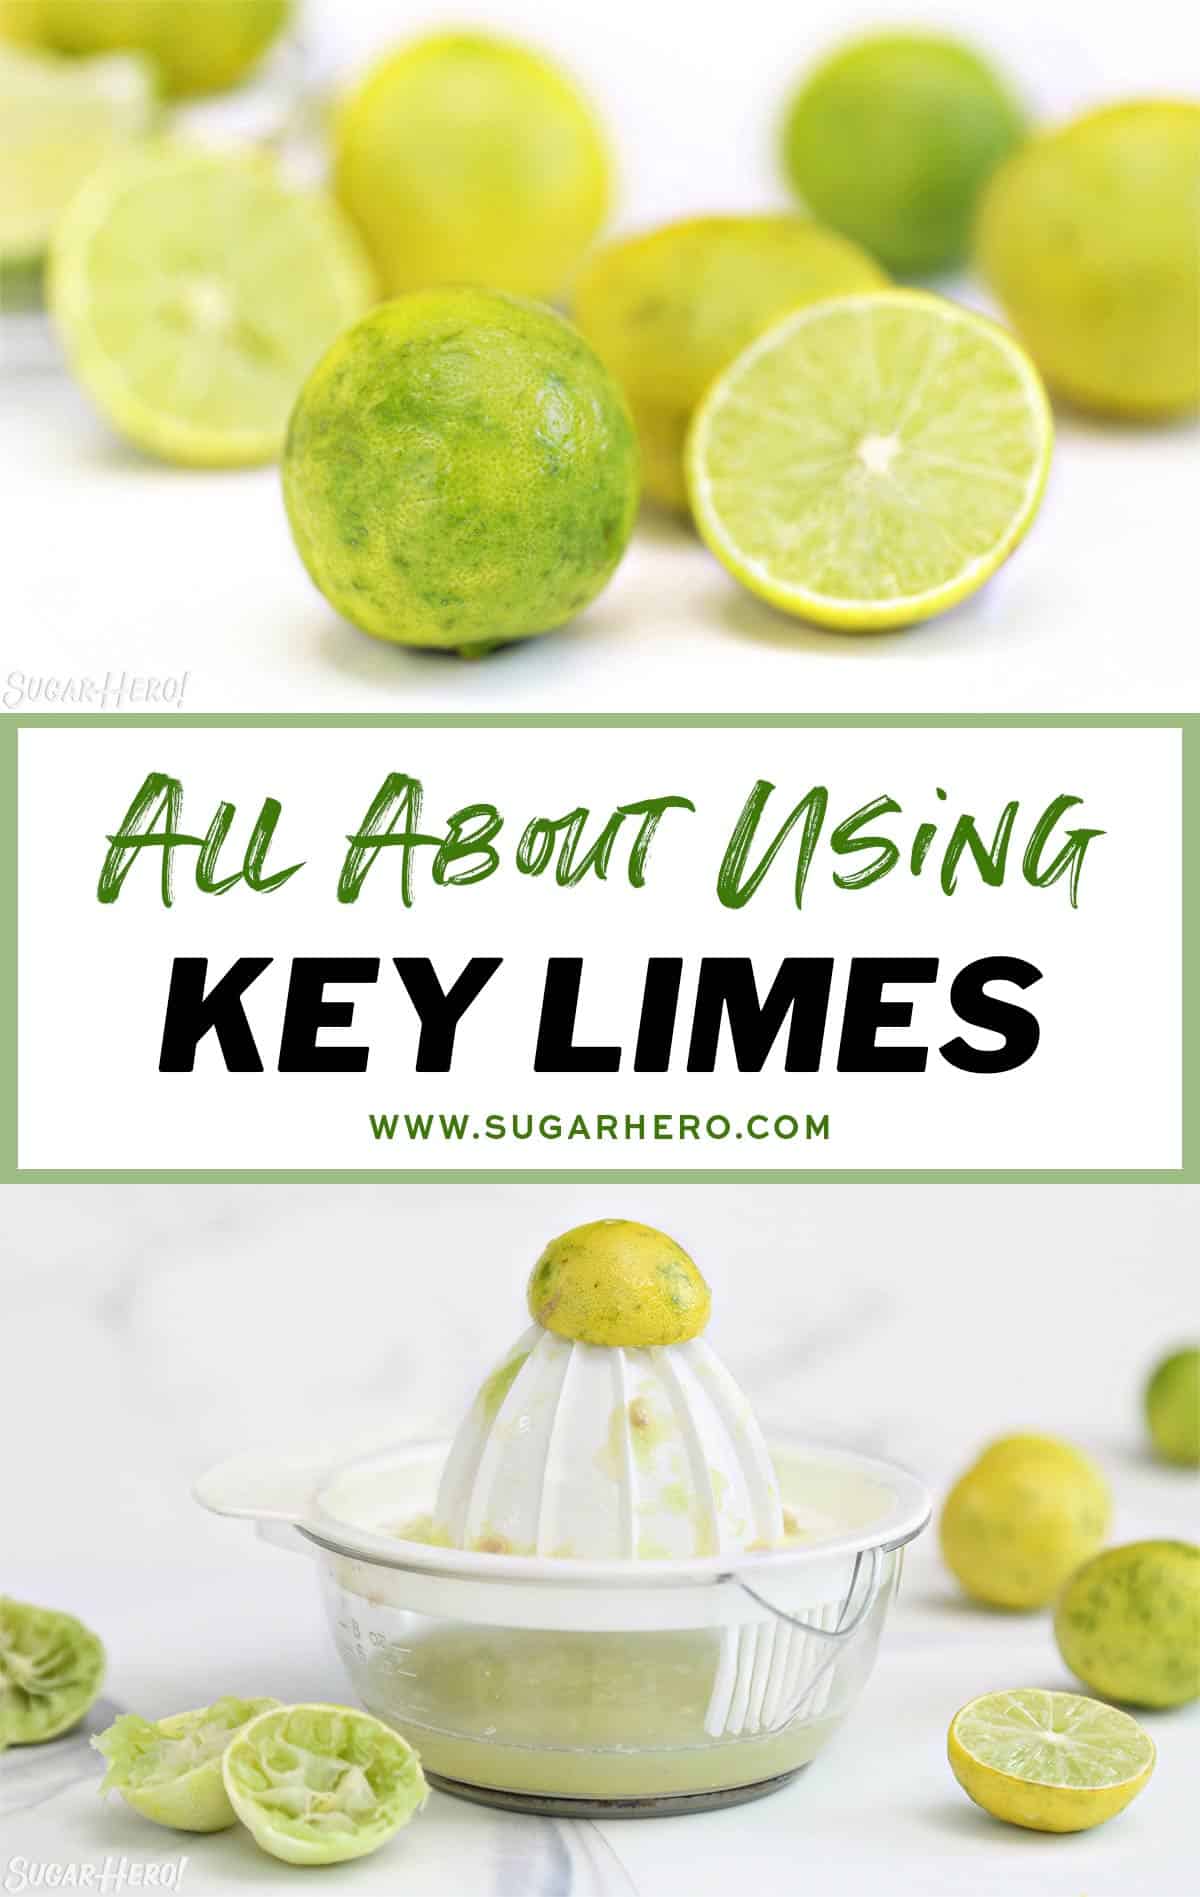 Two photo collage showing how to use and juice key limes.